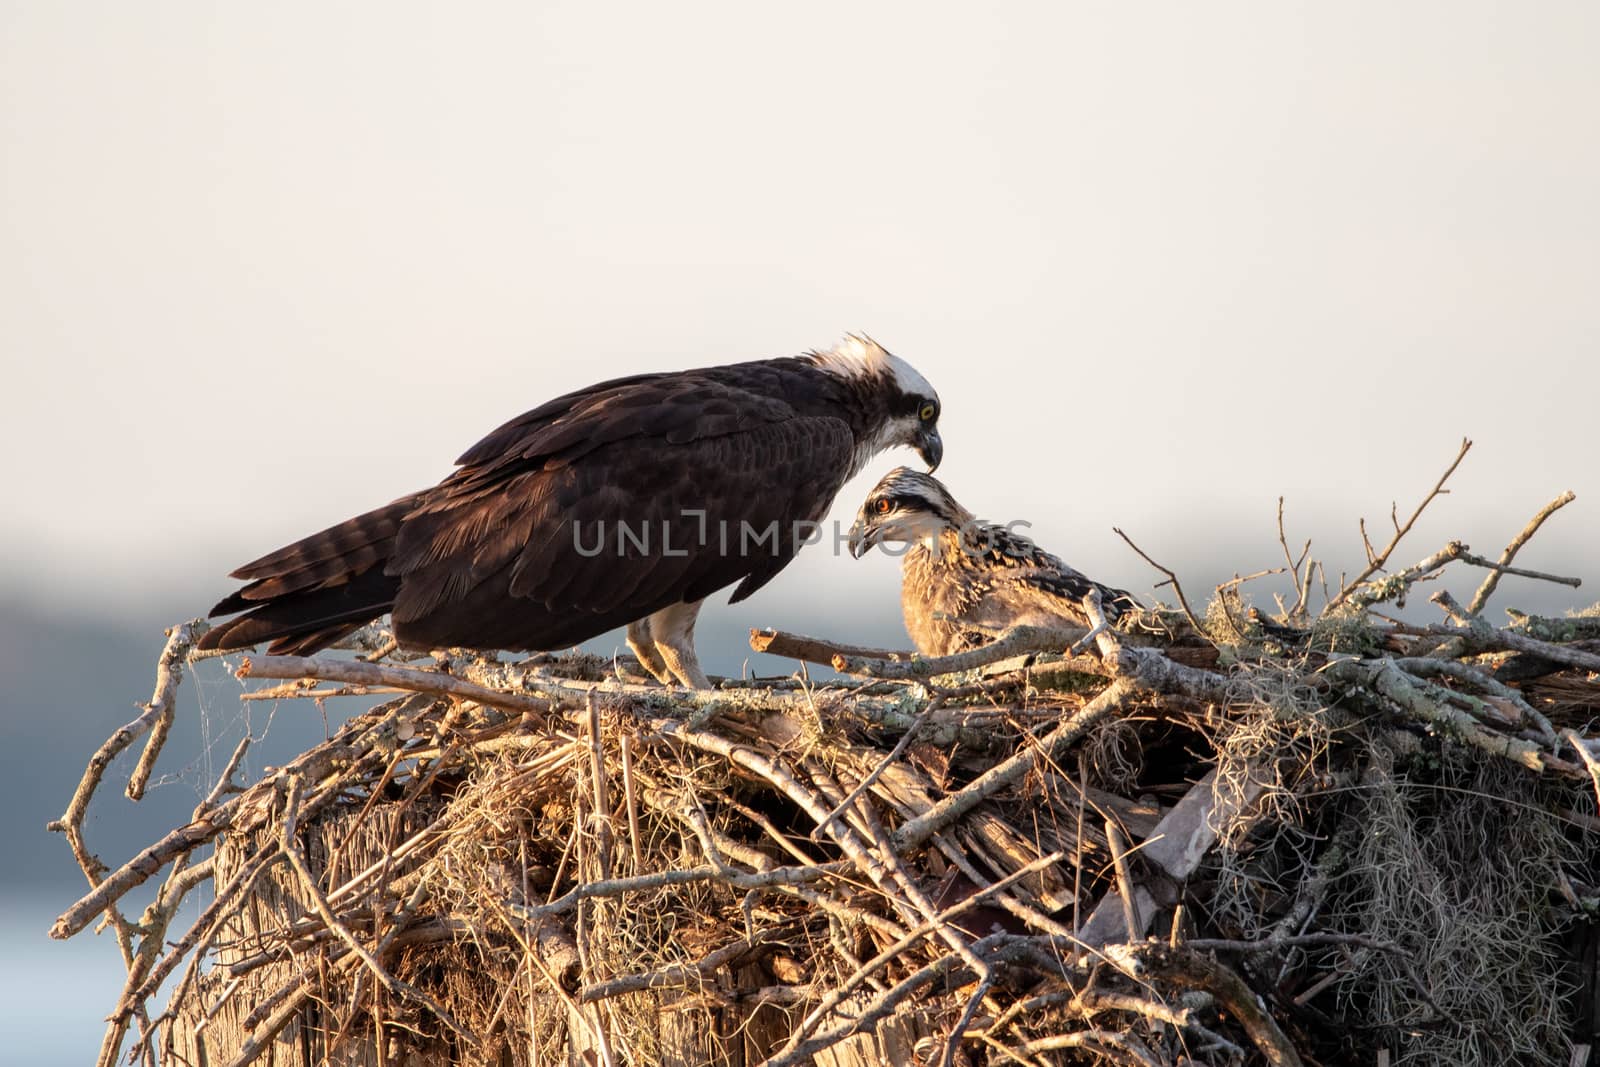 A mother osprey and her chick in the nest.